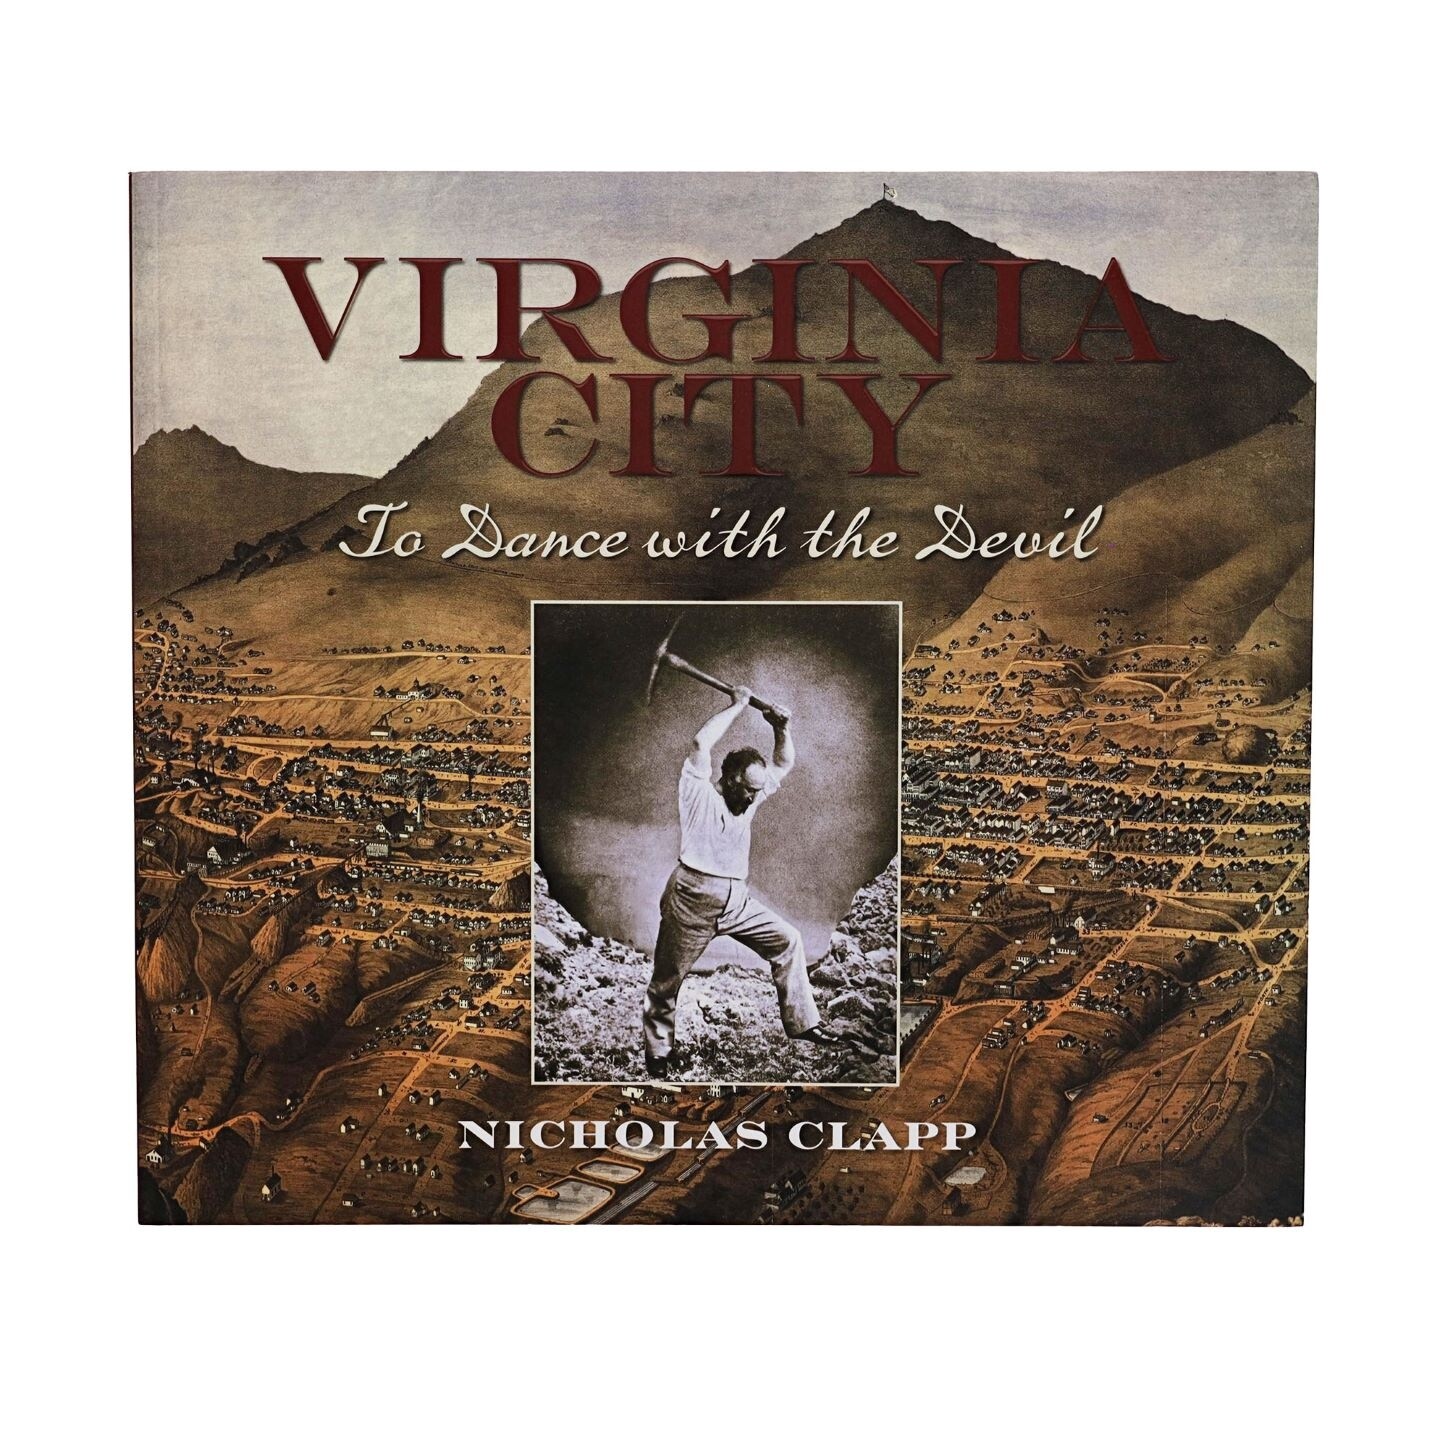 Virginia City, To Dance with the Devil by Nicholas Clapp